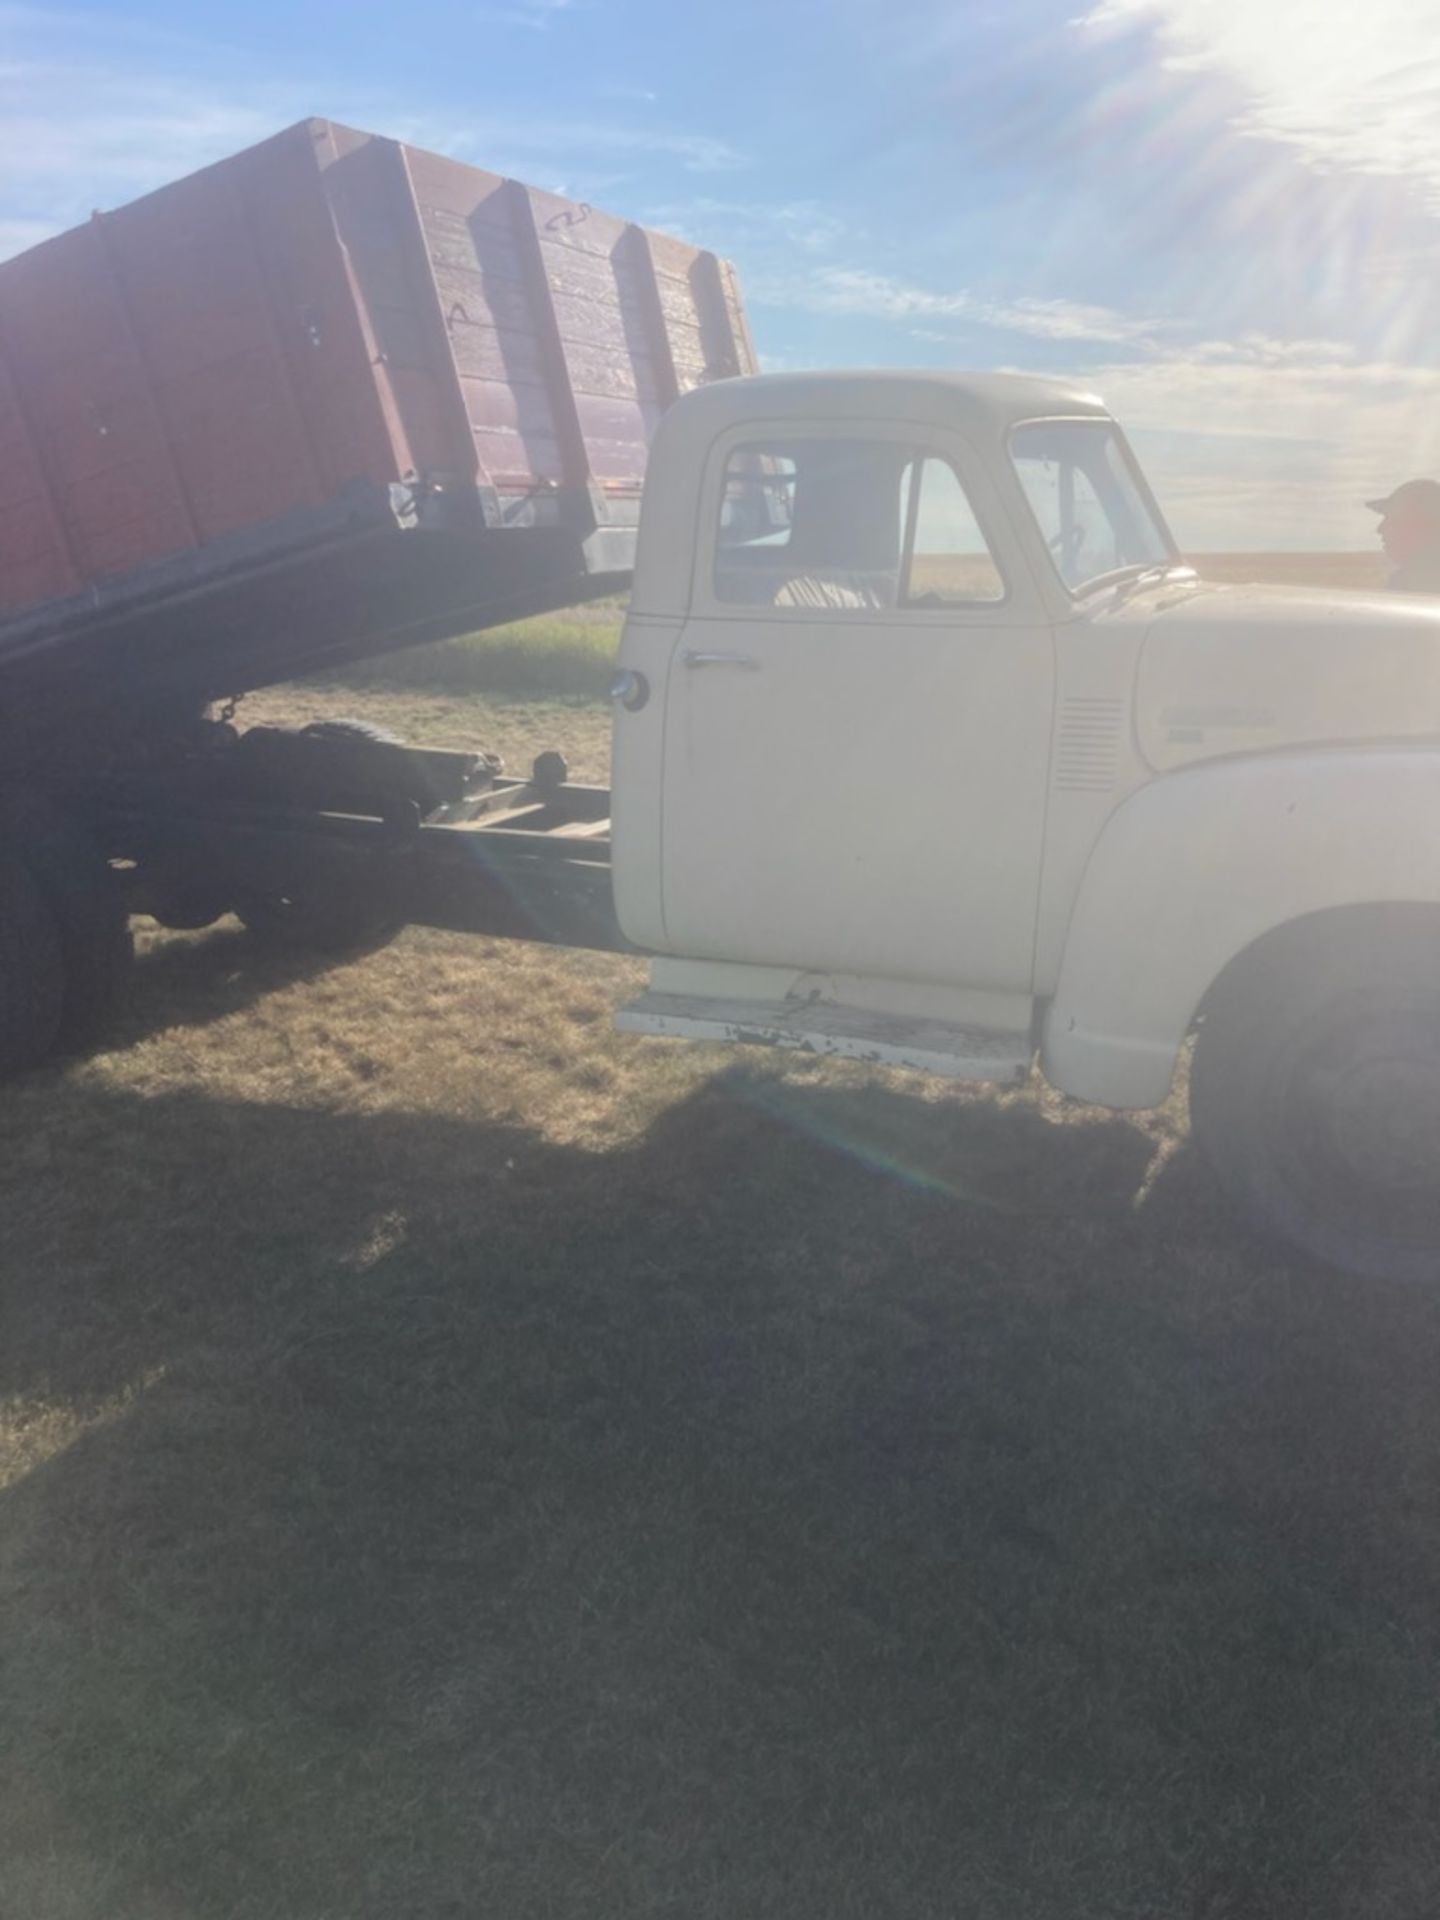 1950 CHEV 1100 1½ TON GRAIN TRUCK 28,000 MILES SHOWING, (FULLY OPERATIONAL) LOCATED @ HODGEVILLE, SK